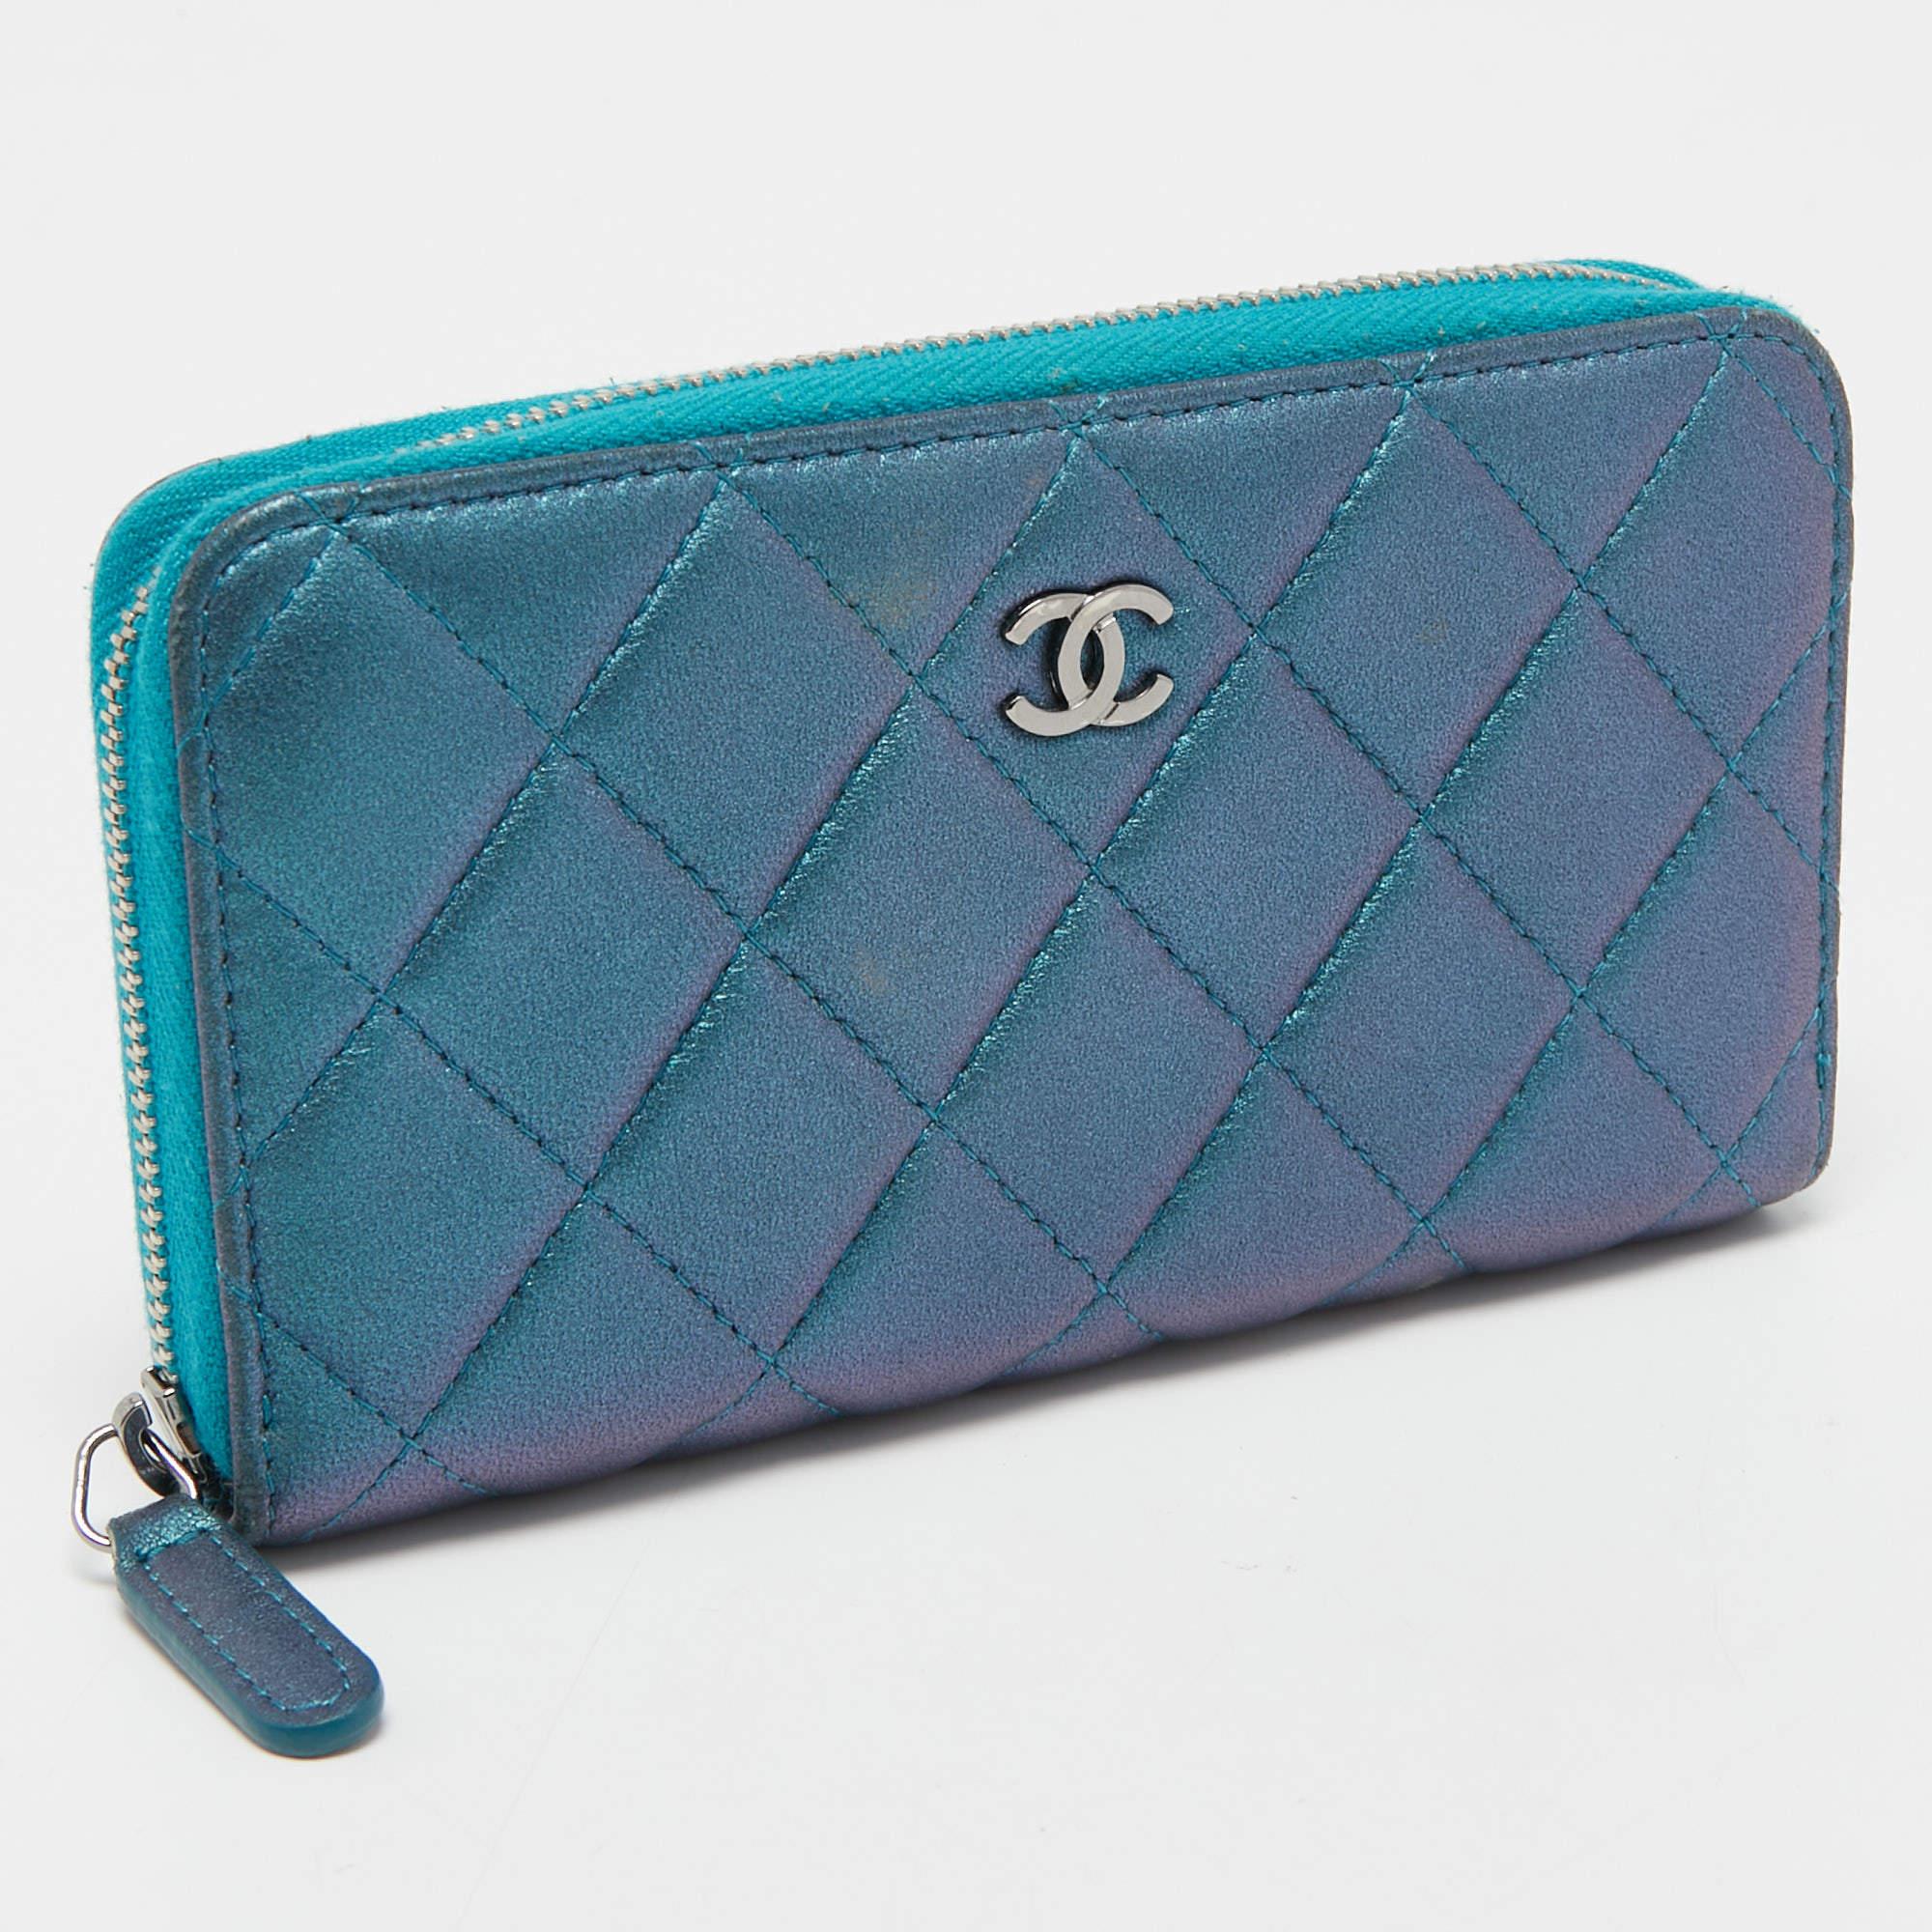 Chanel Metallic Blue Quilted Leather Classic Zip Wallet In Good Condition For Sale In Dubai, Al Qouz 2